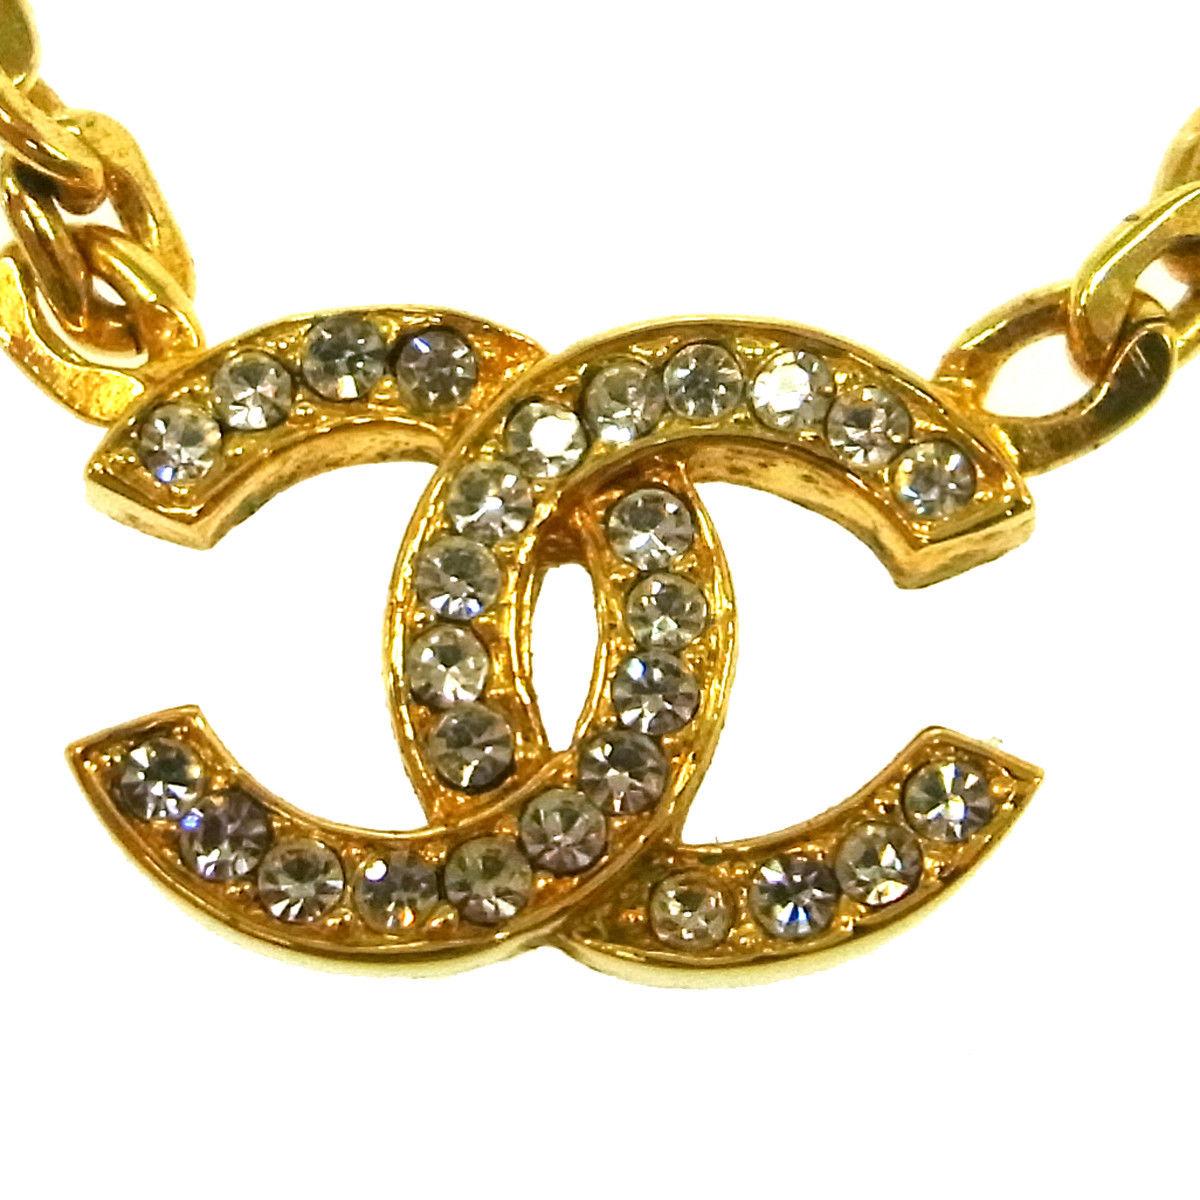 Chanel Gold Chain Link Rhinestone Charm Evening Necklace in Box

Metal
Rhinestone
Gold tone
Lobster claw closure
Made in France
Charm diameter ~1